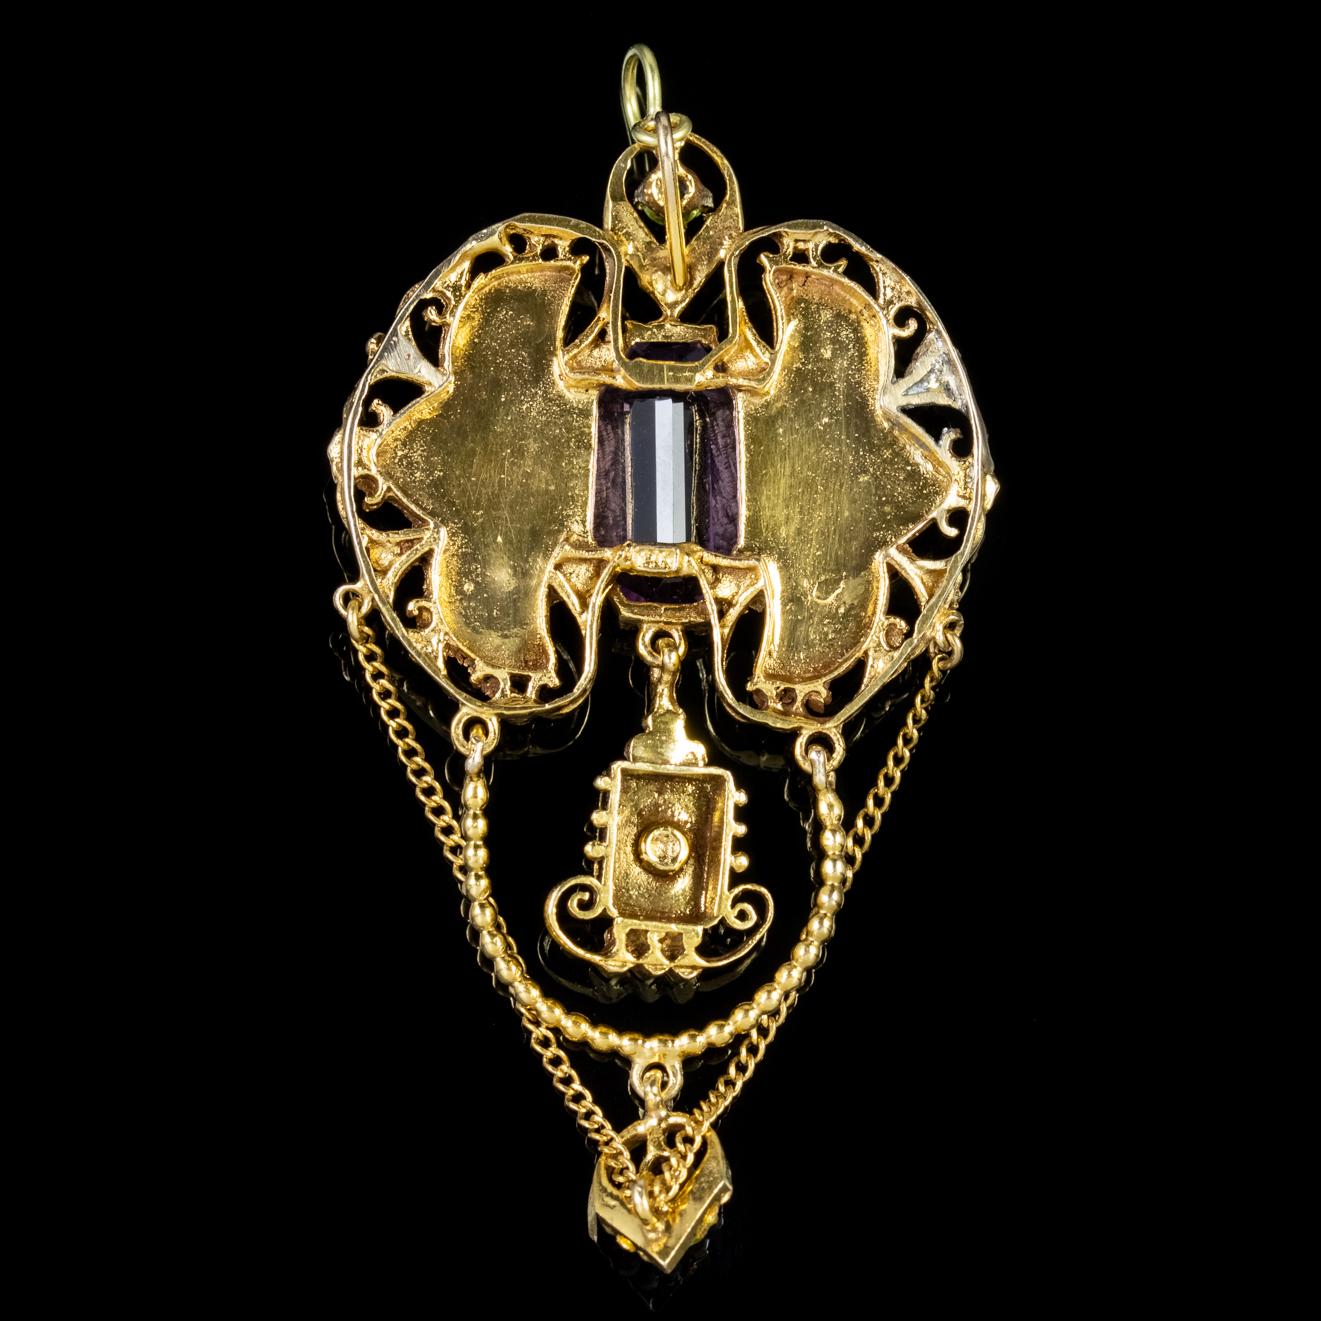 This exquisite antique Edwardian Suffragette pendant is decorated with Pearls and Peridots with an impressive clear violet Amethyst crowned in the centre.

Suffragette jewellery was worn to show one’s allegiance to the women’s Suffragette movement